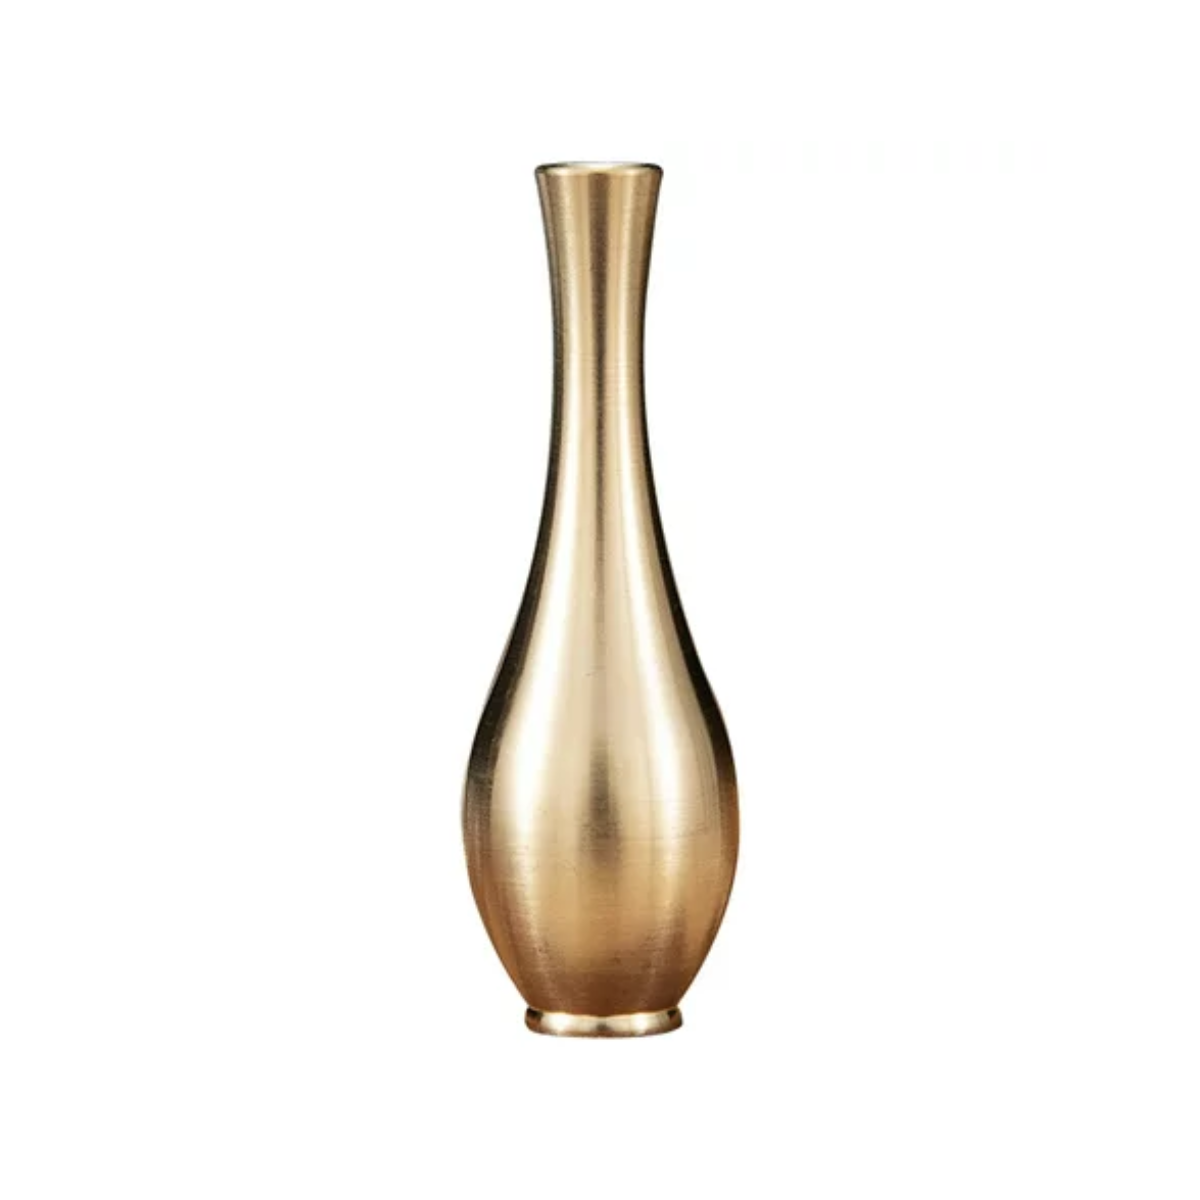 12. Crafted to Perfection: Iron Flower Vase - A Timeless Anniversary Gift for Her